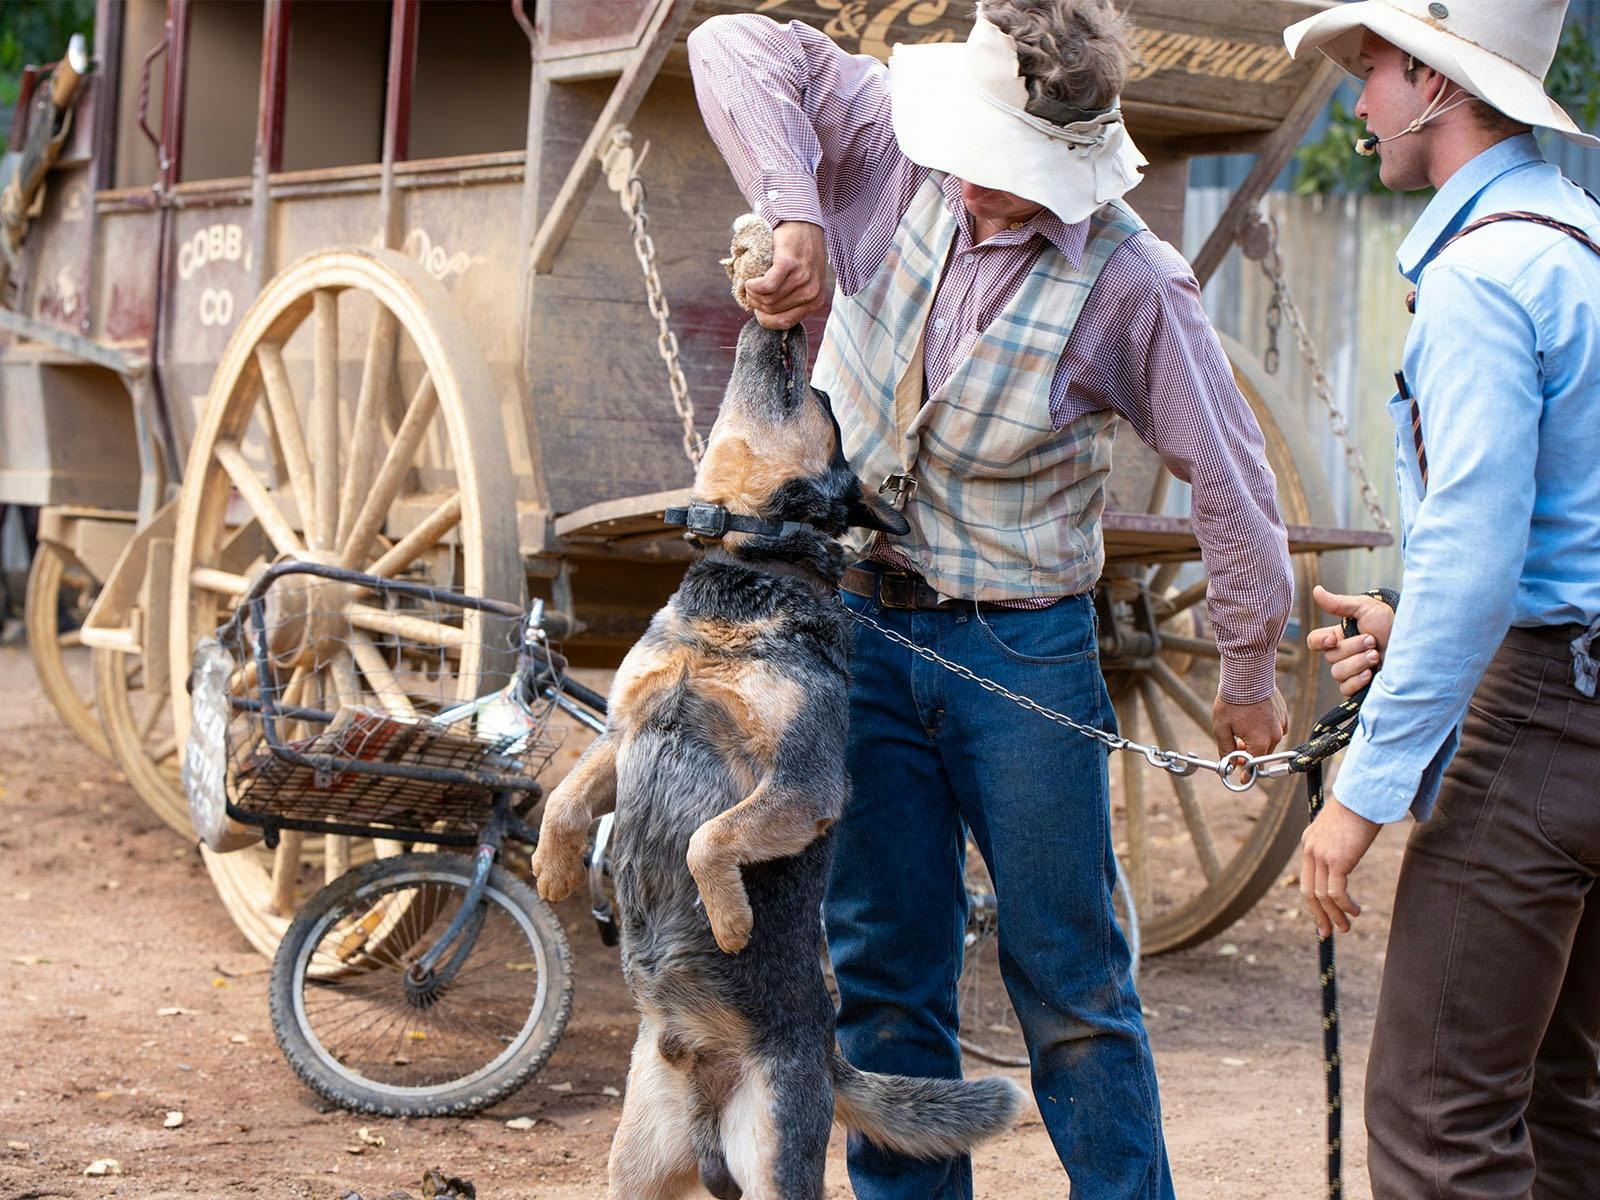 Stockman playing tug of war with a blue heeler dog. Cobb and Co Stagecoach parked in the background